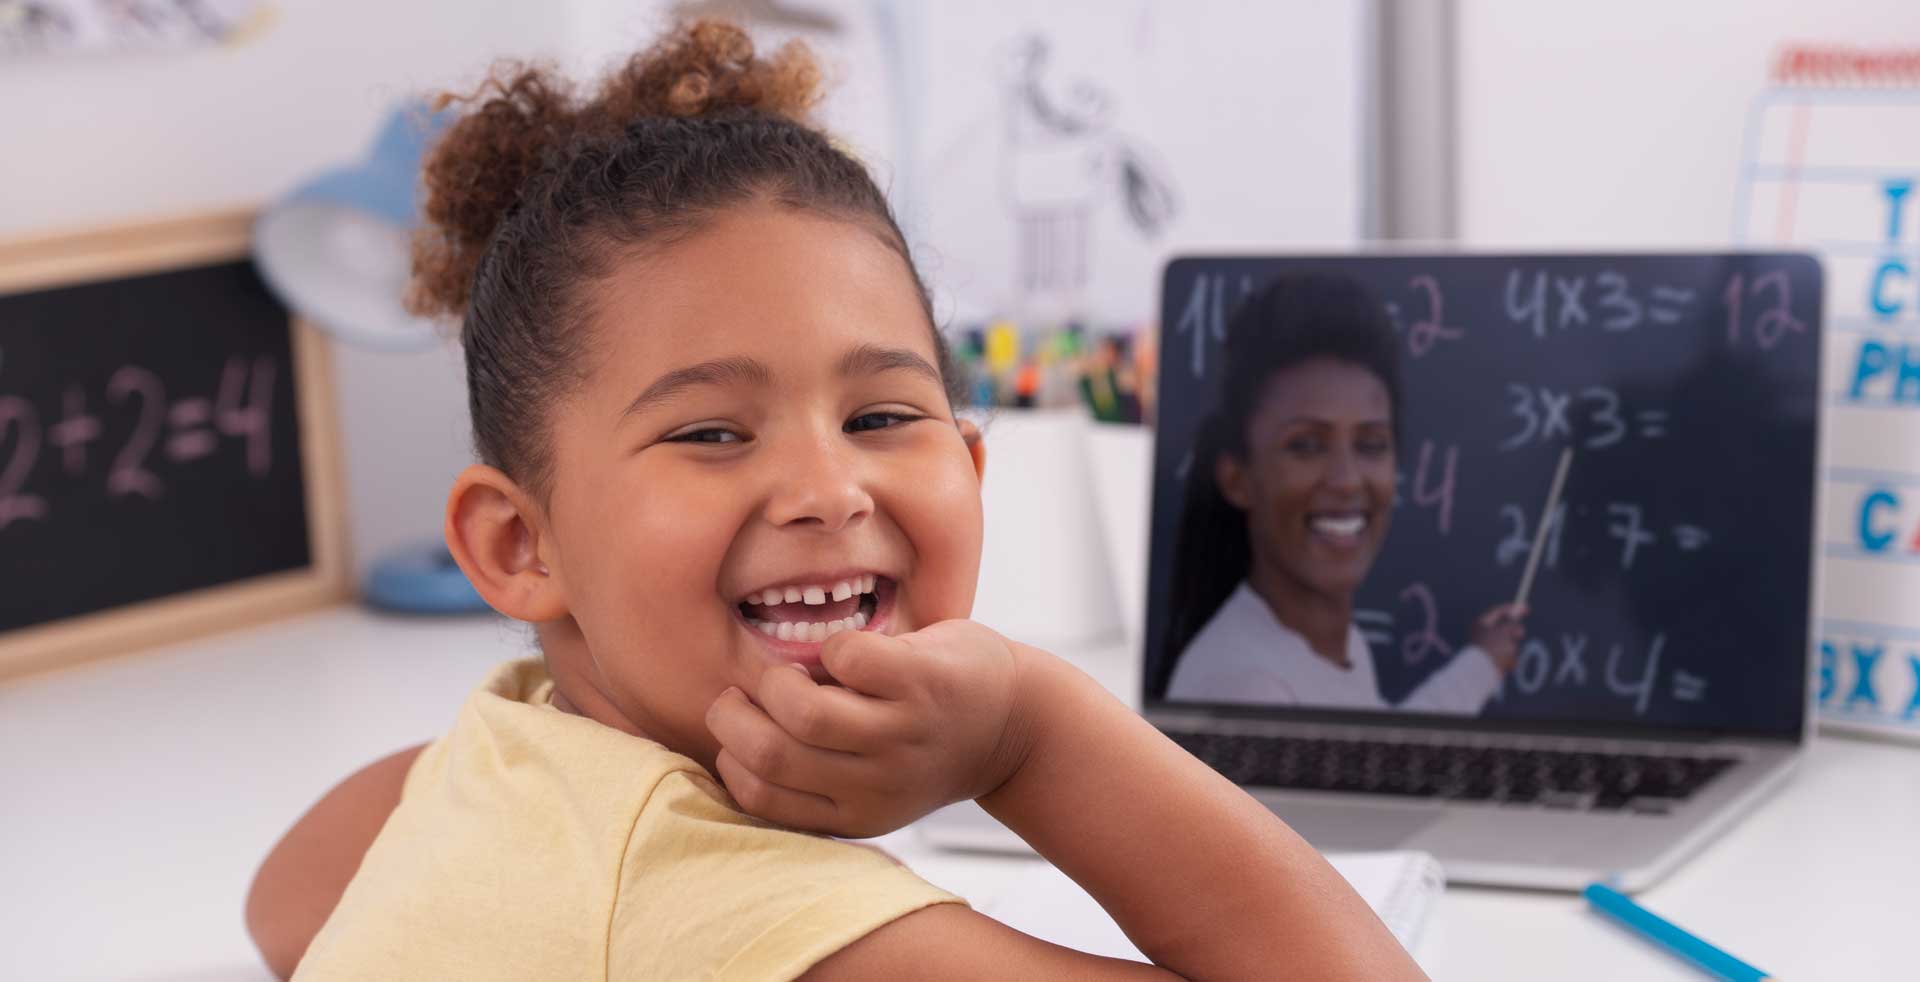 A young girl smiles at the camera, whilst she sits at a laptop that is showing a video teaching maths